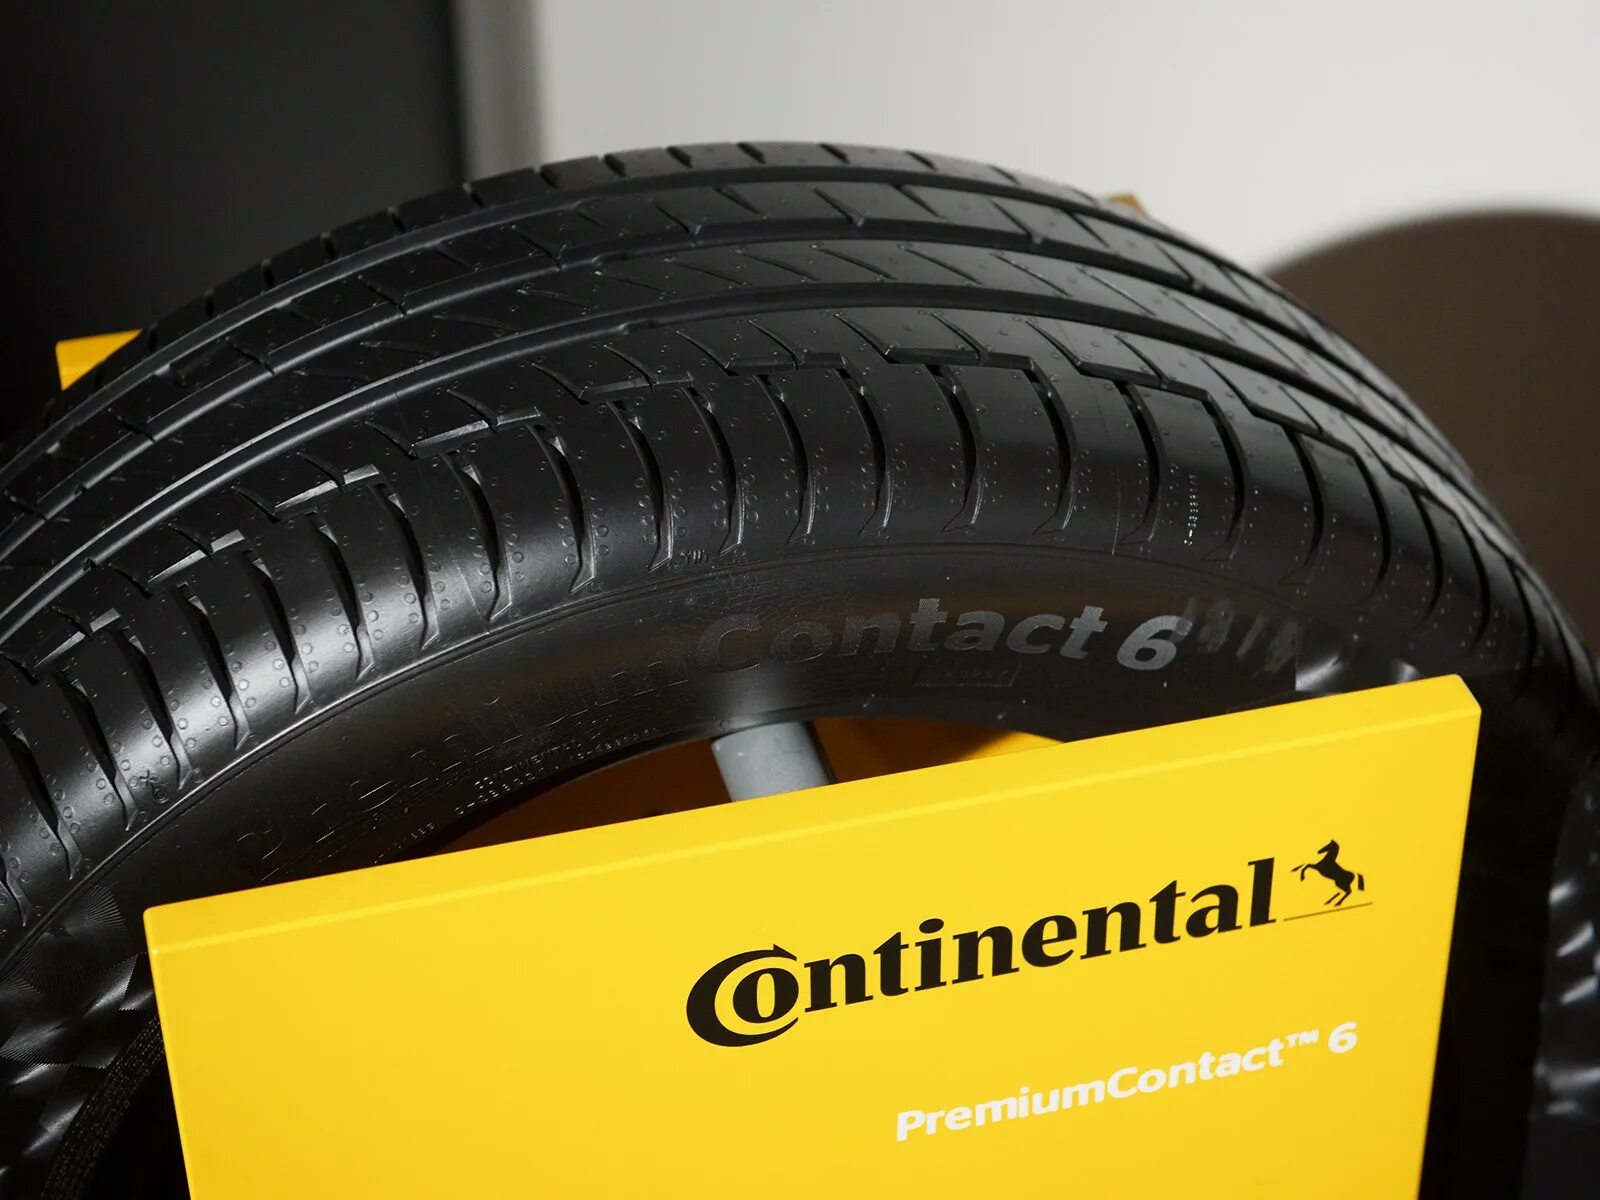 Continental PREMIUMCONTACT 6. Continental PREMIUMCONTACT 6 летняя. Continental PREMIUMCONTACT 7. Резина Continental Premium contact 6.